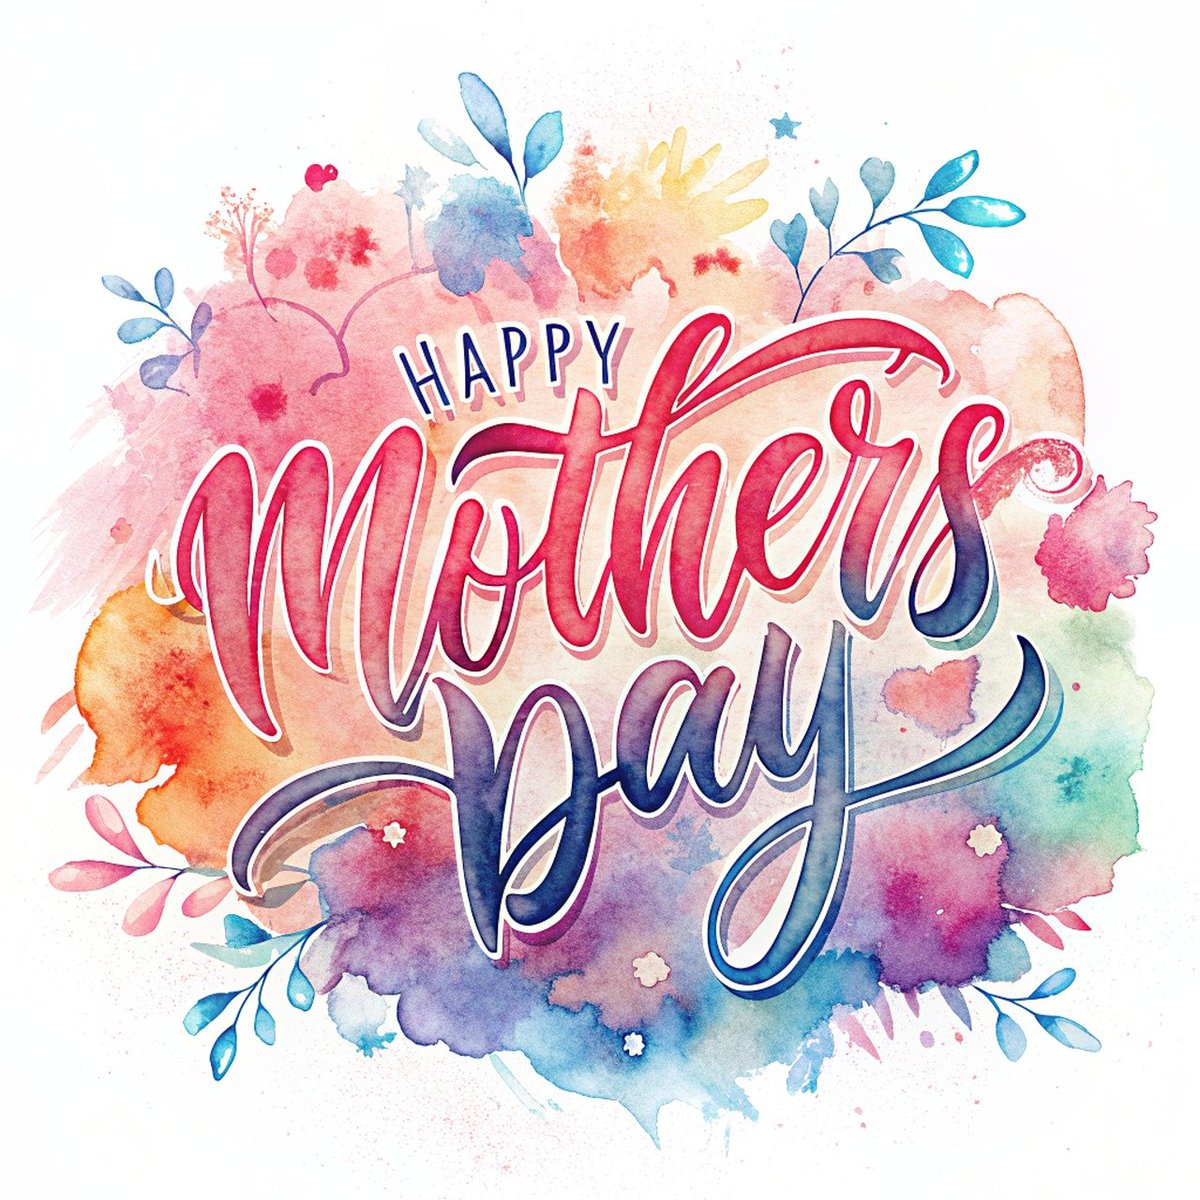 HAPPY MOTHER'S DAY! To all the mothers in our world: ENJOY YOUR SPECIAL DAY. #MothersDay #Celebrate #FamilyLife #MothersDay2024 #Motherhood #AuthorJudyAnnDavis #Writer #Blogger